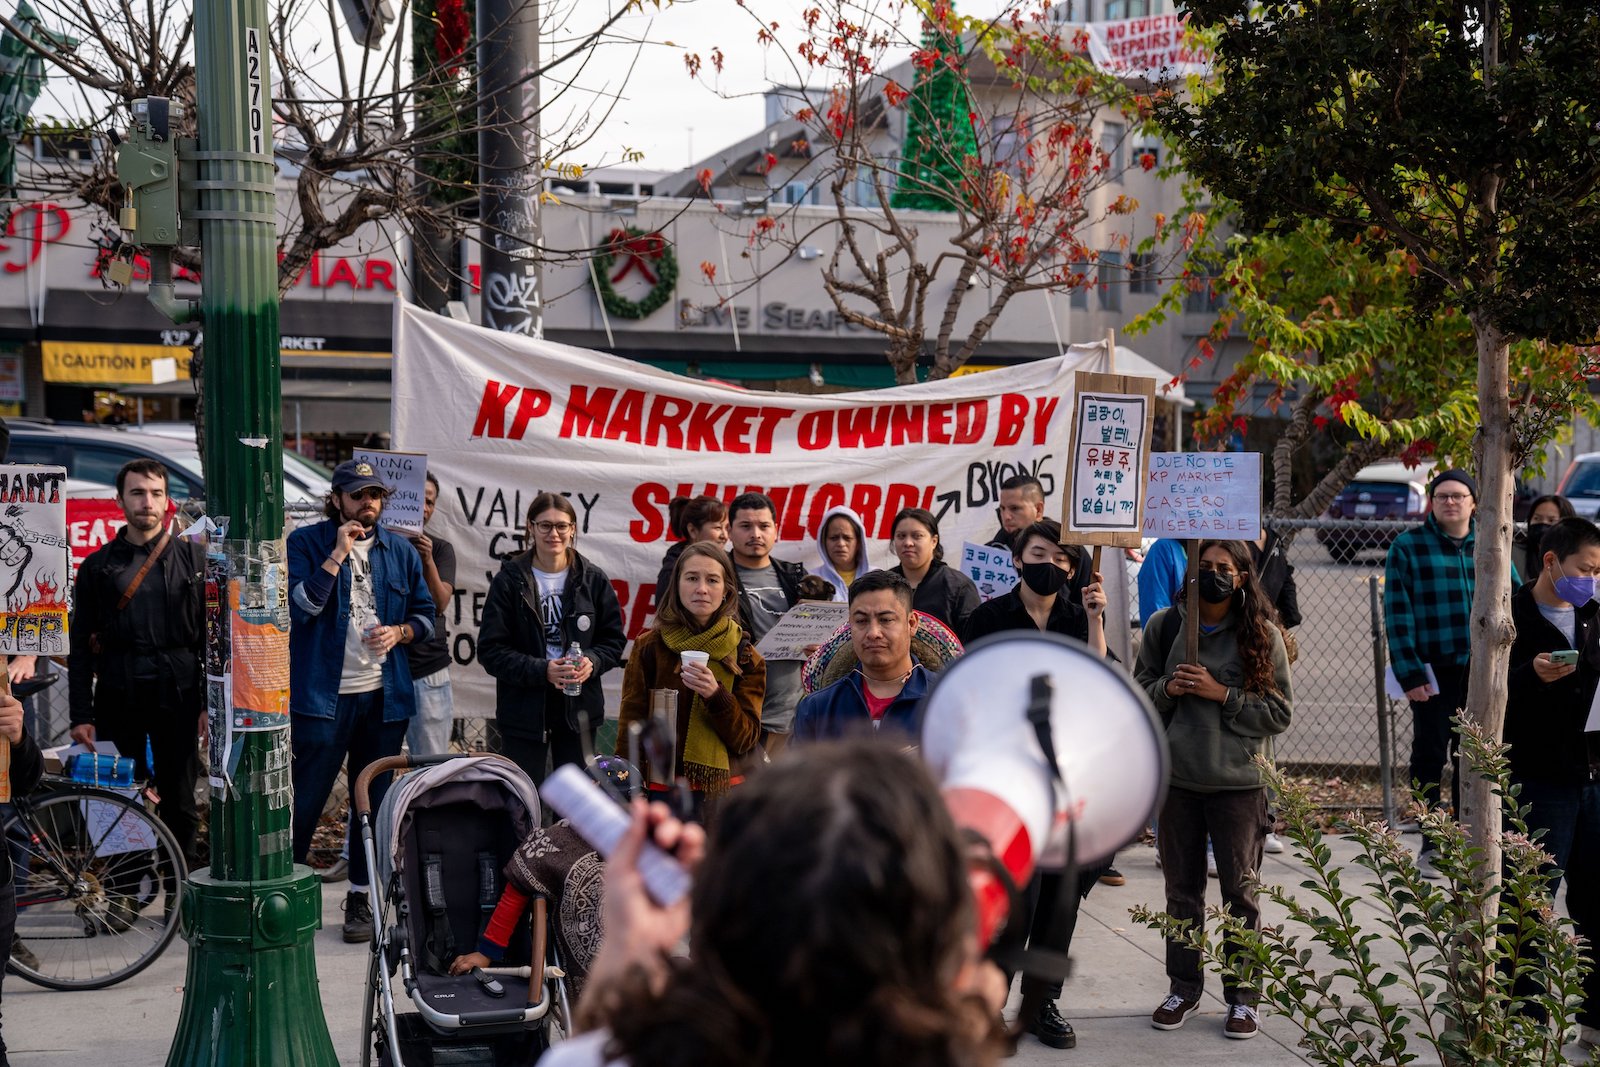 About 15 people protesting with a megaphone and a banner that says "KP Market owned by slumlord"